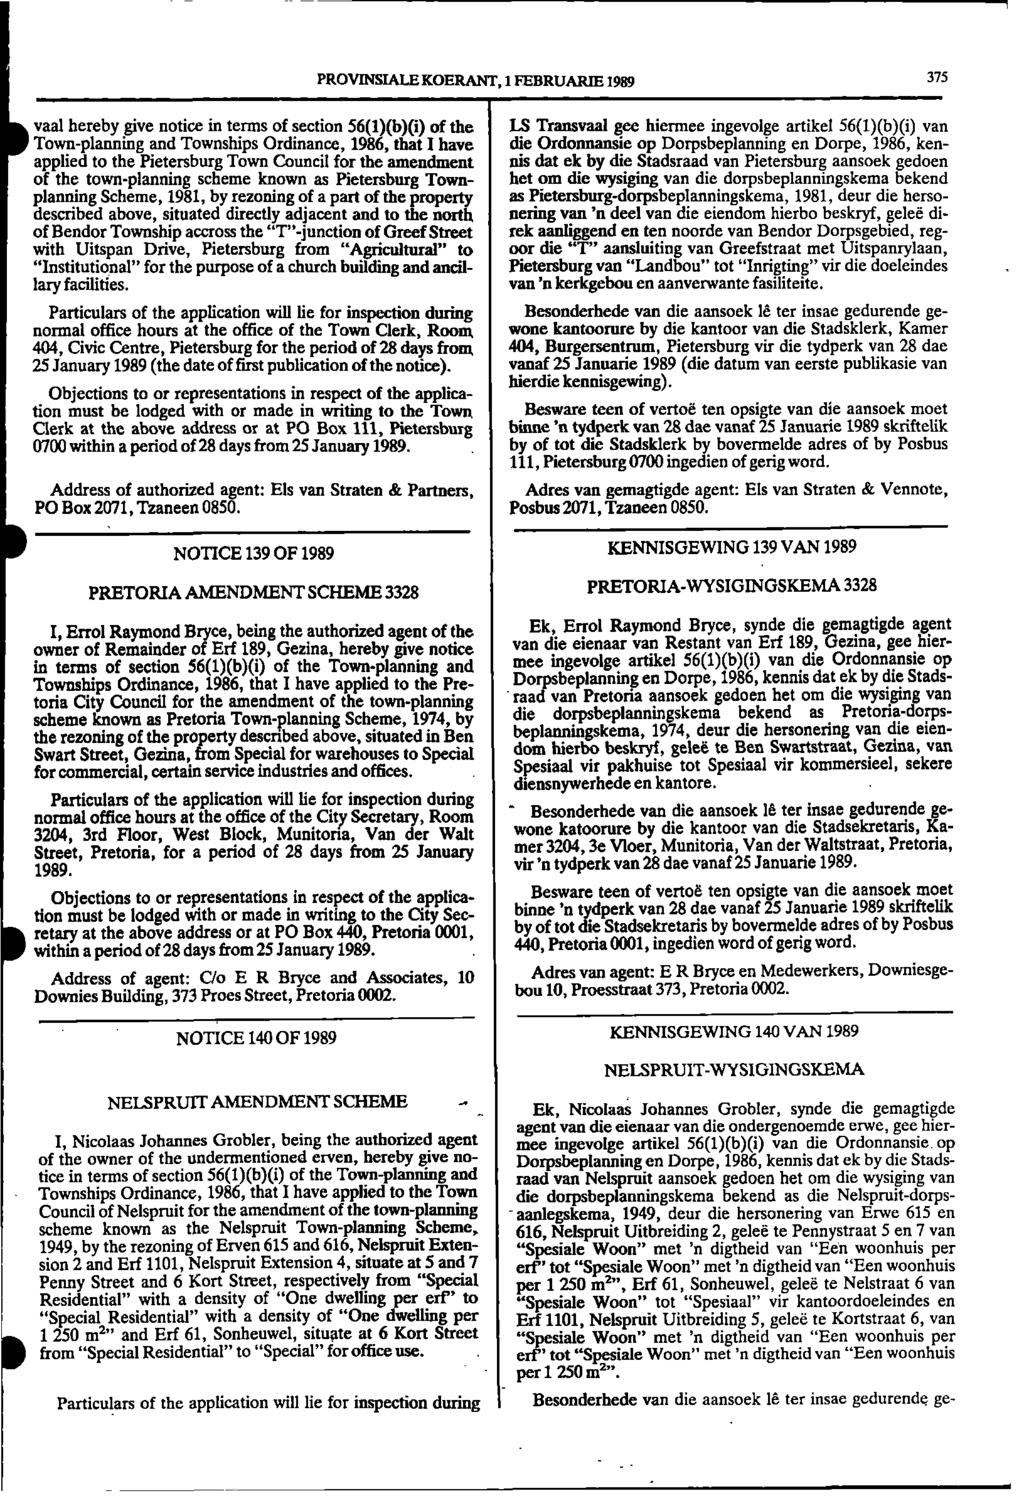 liprovinsiale II KOERANT, 1 FEBRUARIE 1989 vaal hereby give notice in terms of section 56(1)(b)(i) of the LS Transvaal gee hiermee ingevolge artikel 56(1)(b)(i) van Town - planning and Townships